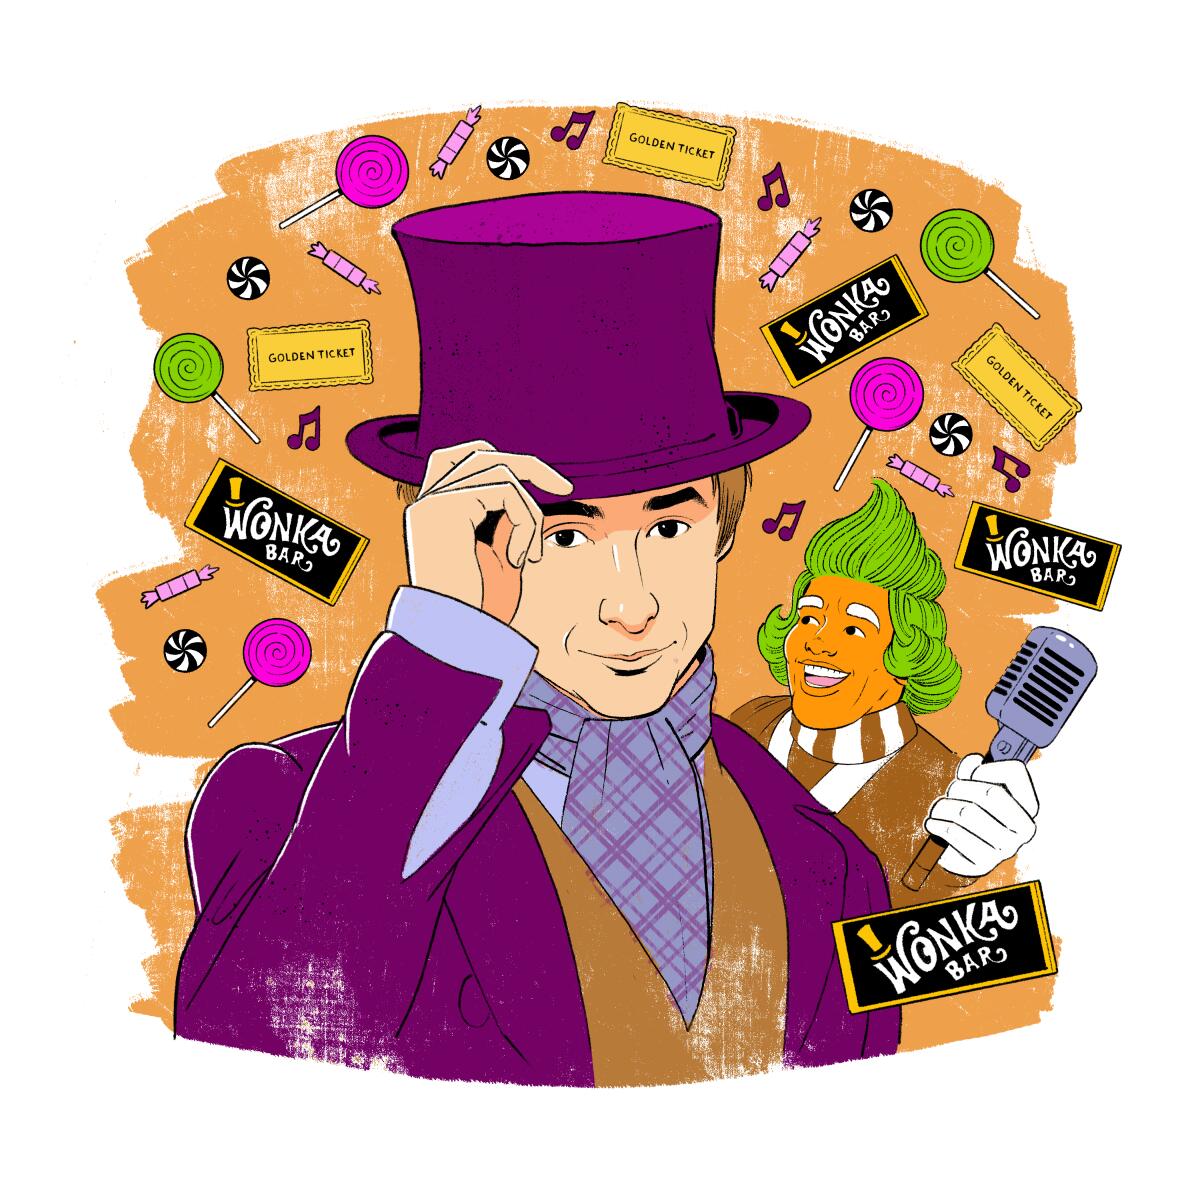 Neil Hannon's eccentric songwriting is featured in the upcoming "Wonka."